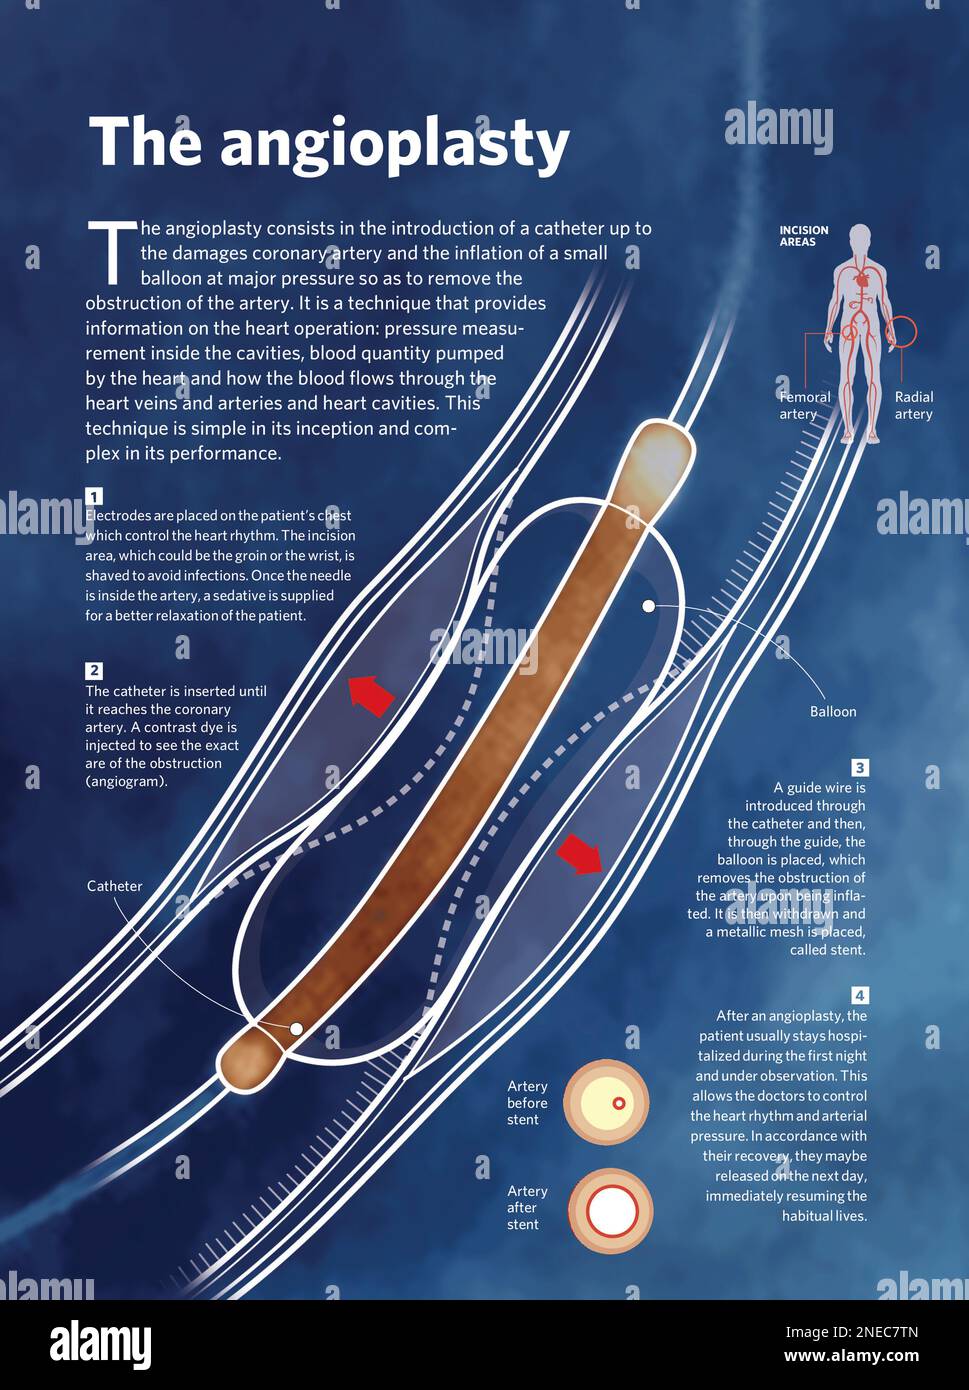 Infographic about angioplasty, the surgical removal of a blockage inside a blood vessel using a catheter. [Adobe InDesign (.indd)]. Stock Photo